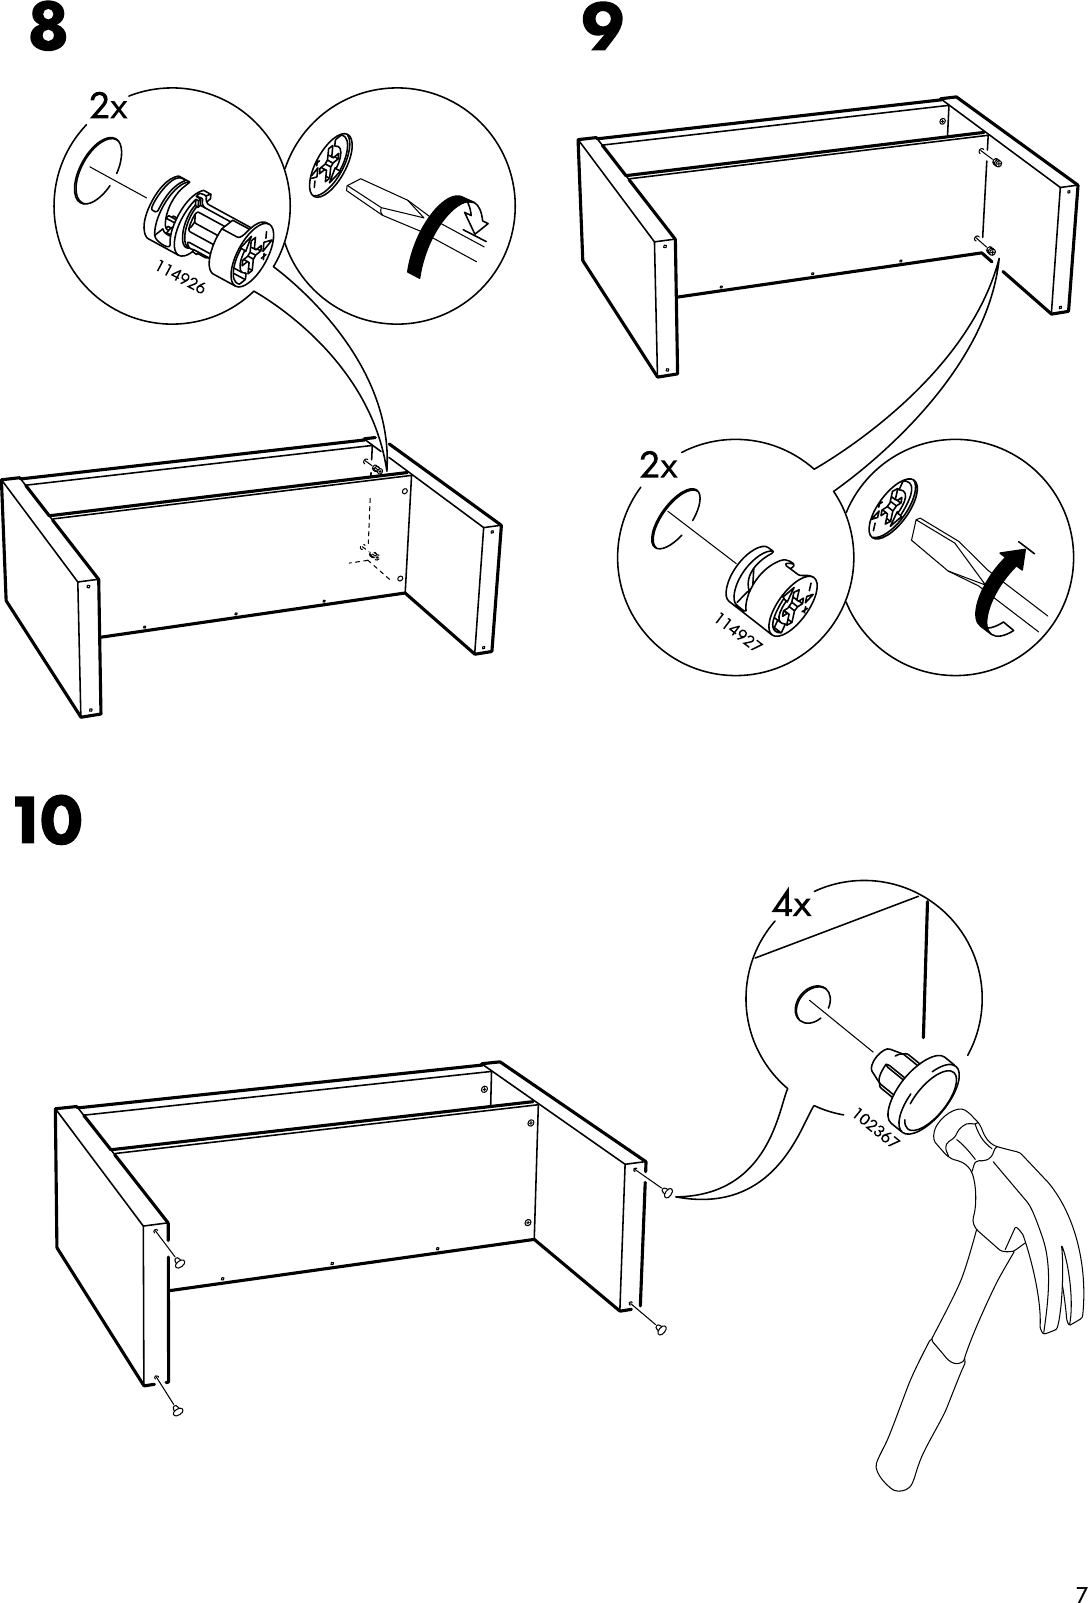 Page 7 of 8 - Ikea Ikea-Expedit-Sofa-Table-Assembly-Instruction